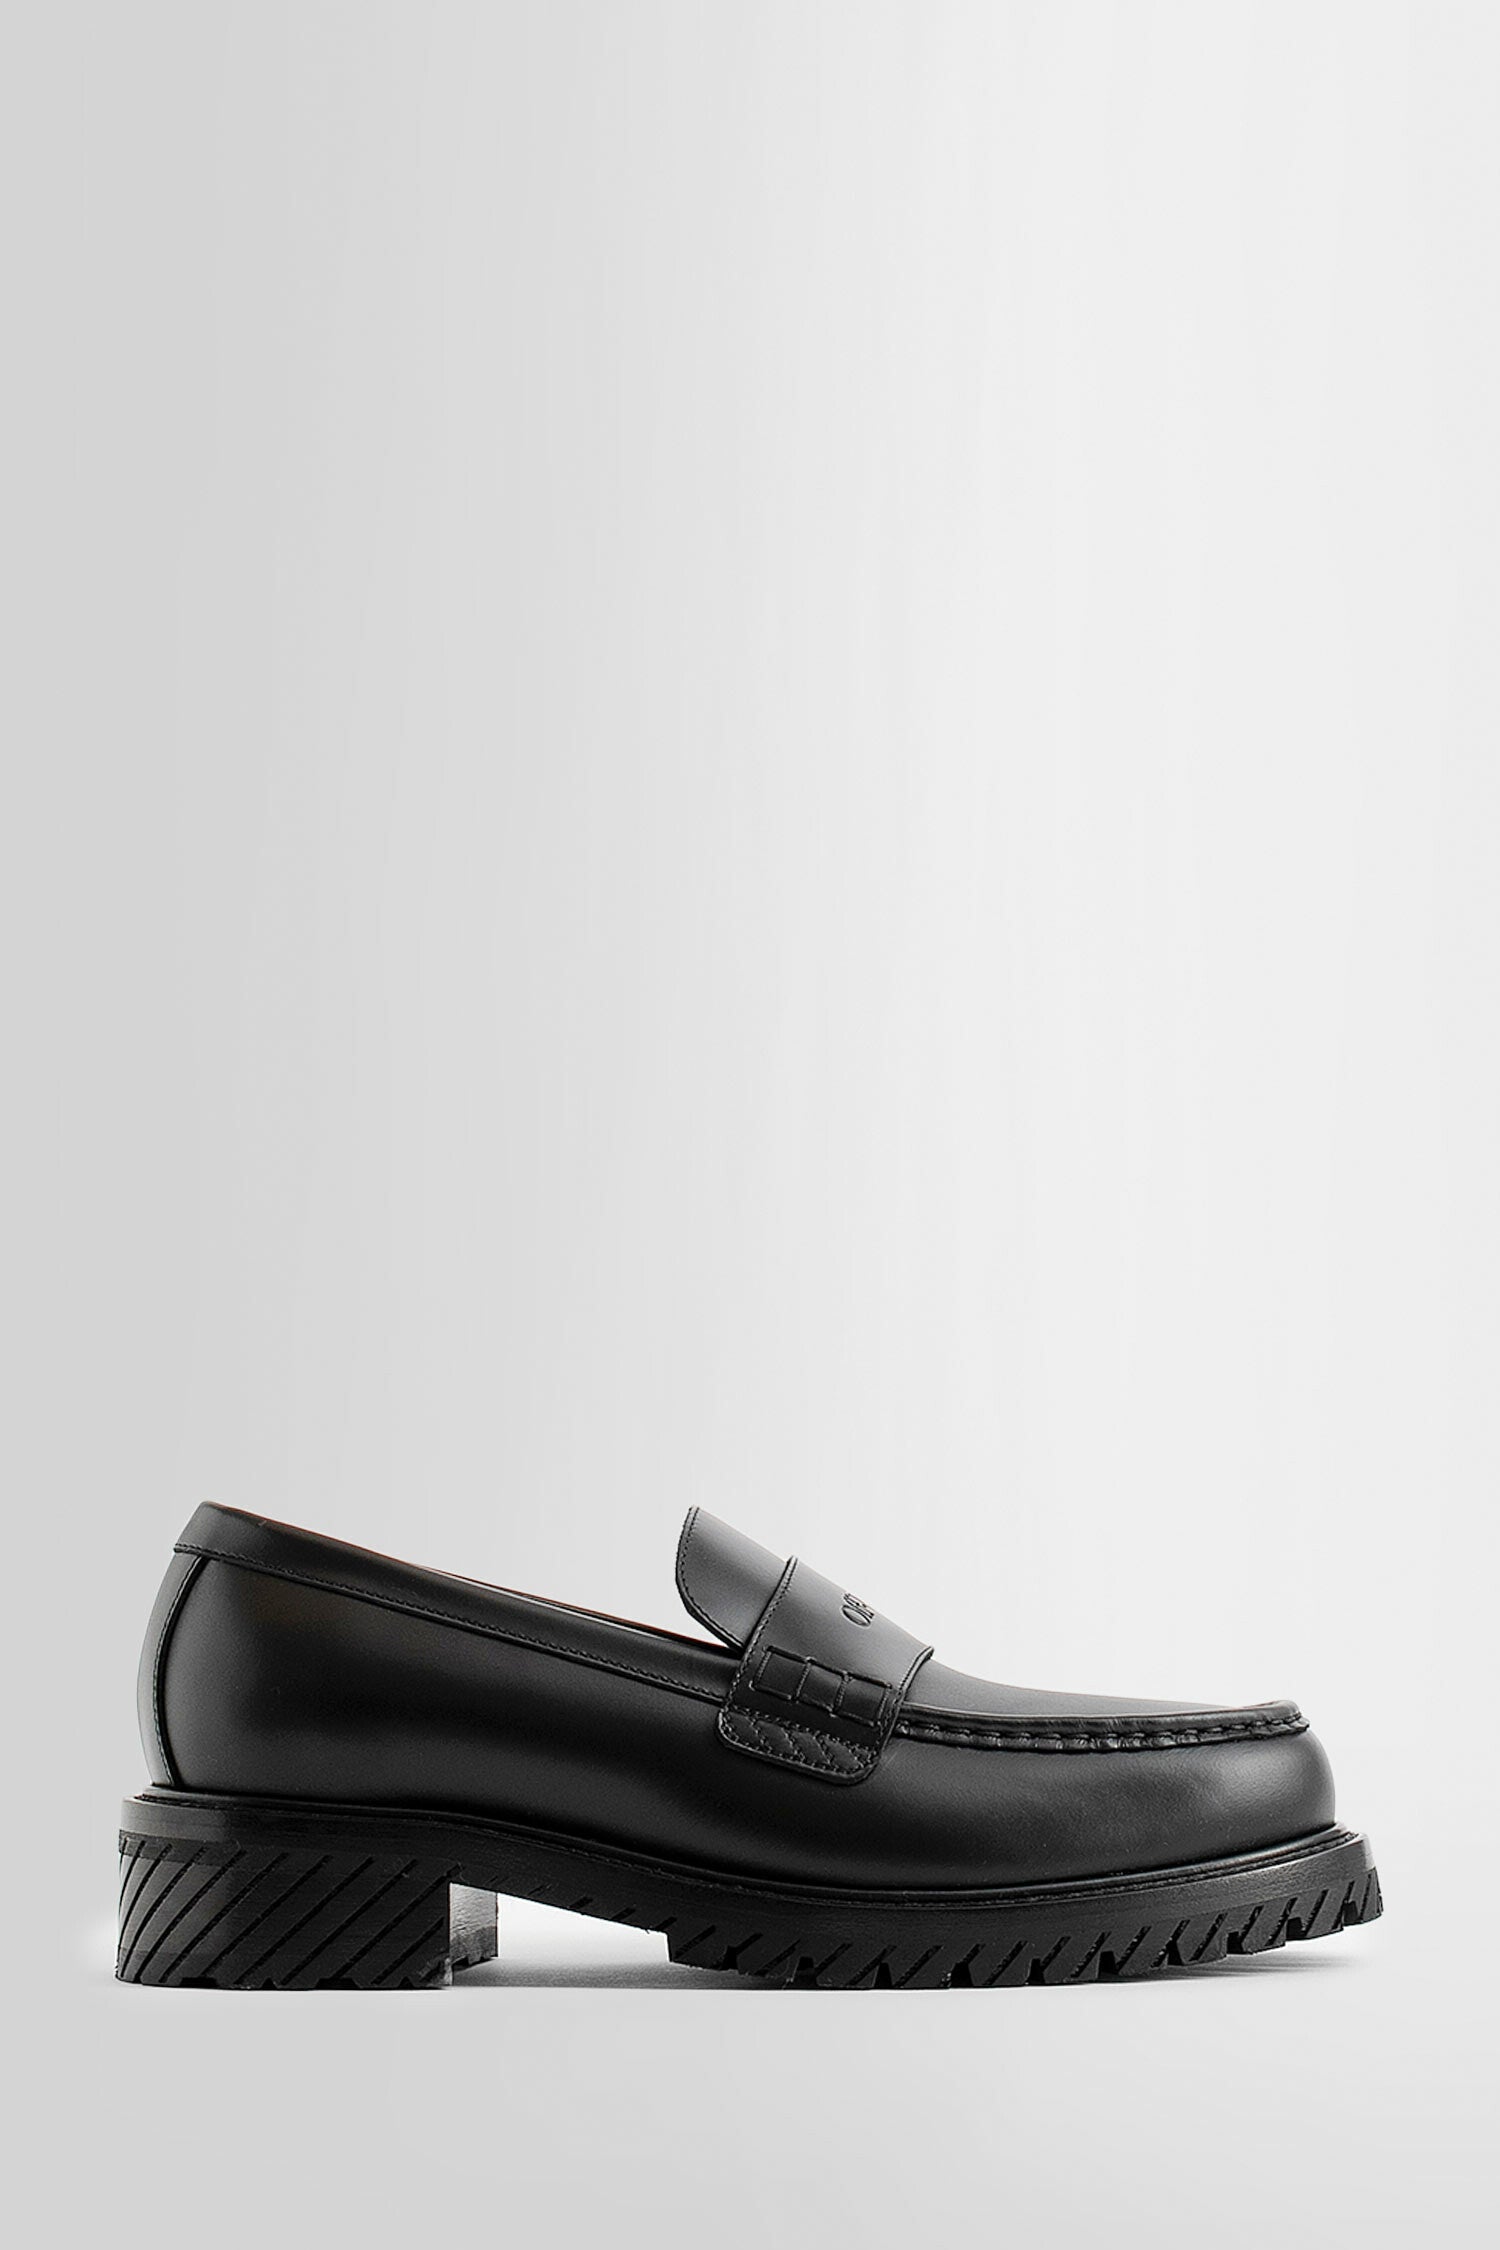 OFF-WHITE MAN BLACK LOAFERS & FLATS